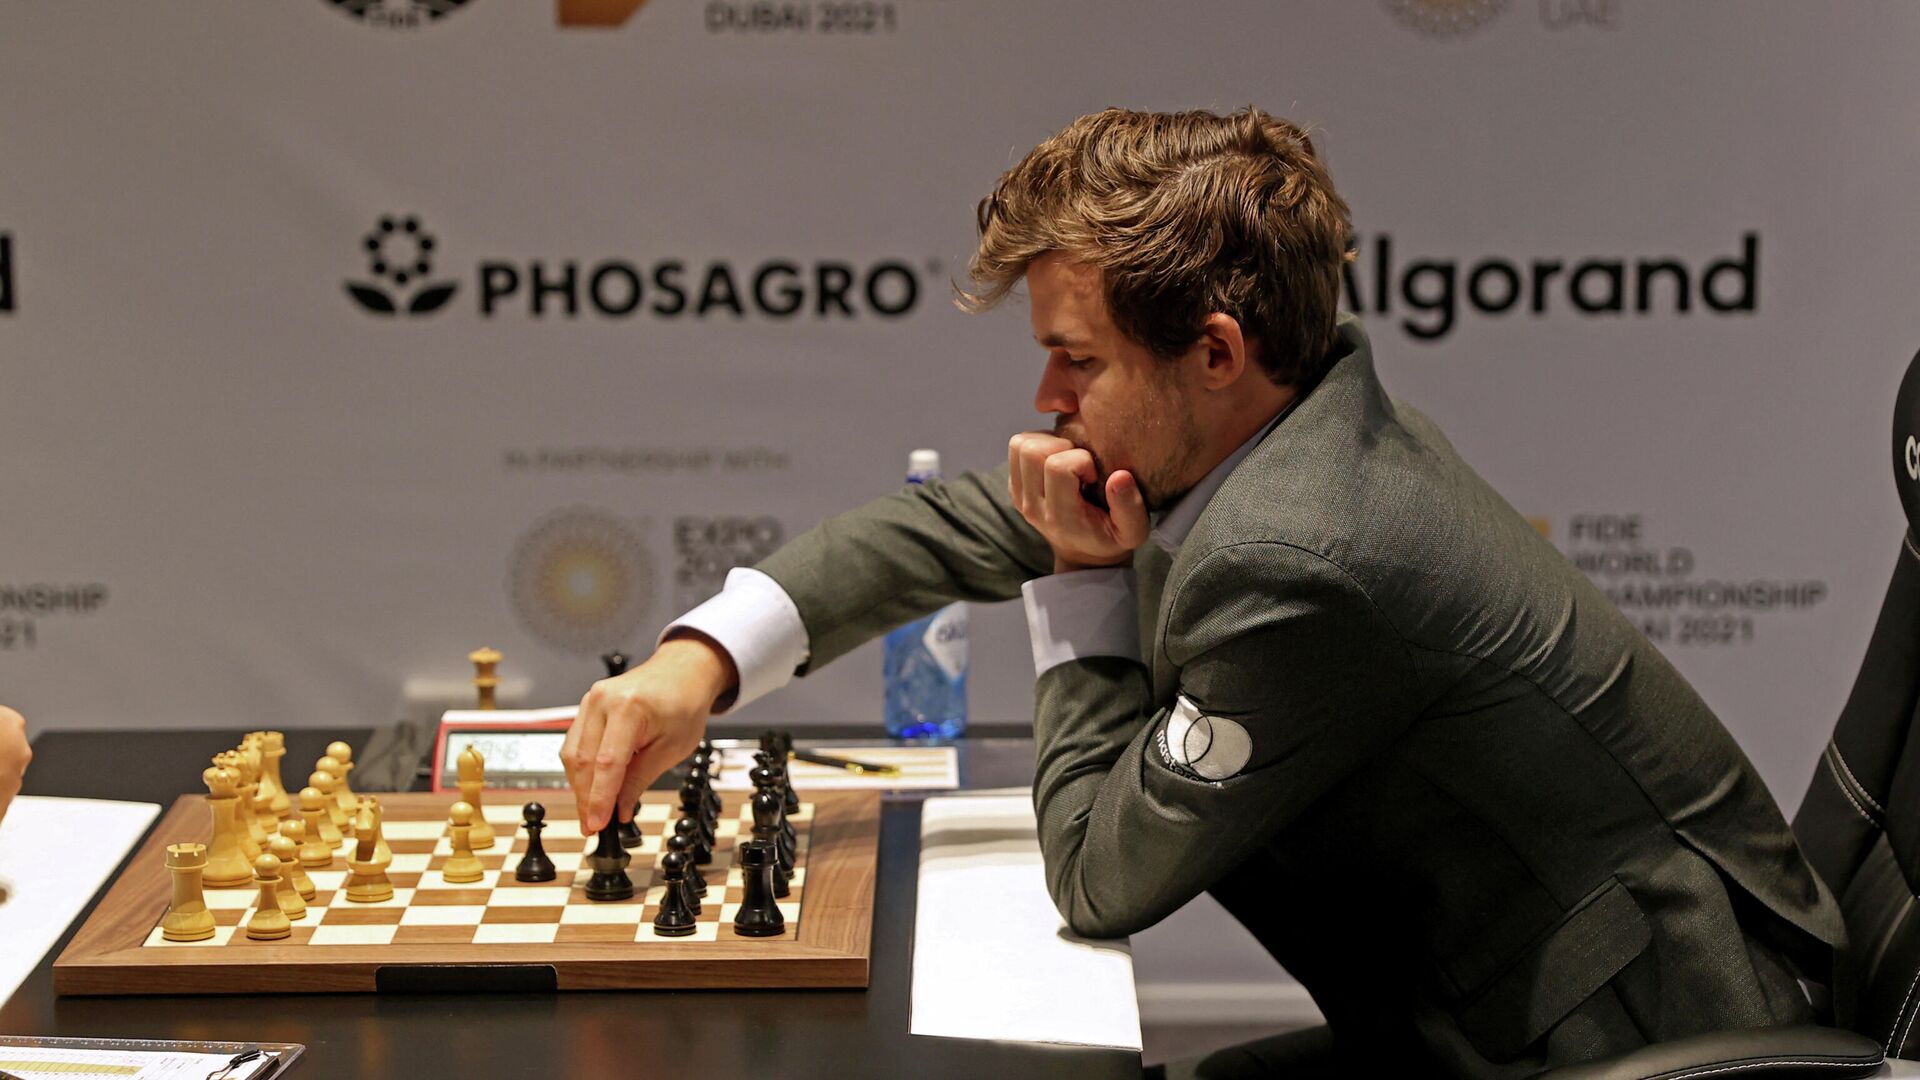 Norway's grandmaster Magnus Carlsen competes with Russia's grandmaster Ian Nepomniachtchi (unseen) during game 11 in the FIDE World Chess Championship Dubai 2021, at the Dubai Expo 2020 in the Gulf emirate, on December 10, 2021.  - Sputnik International, 1920, 10.12.2021